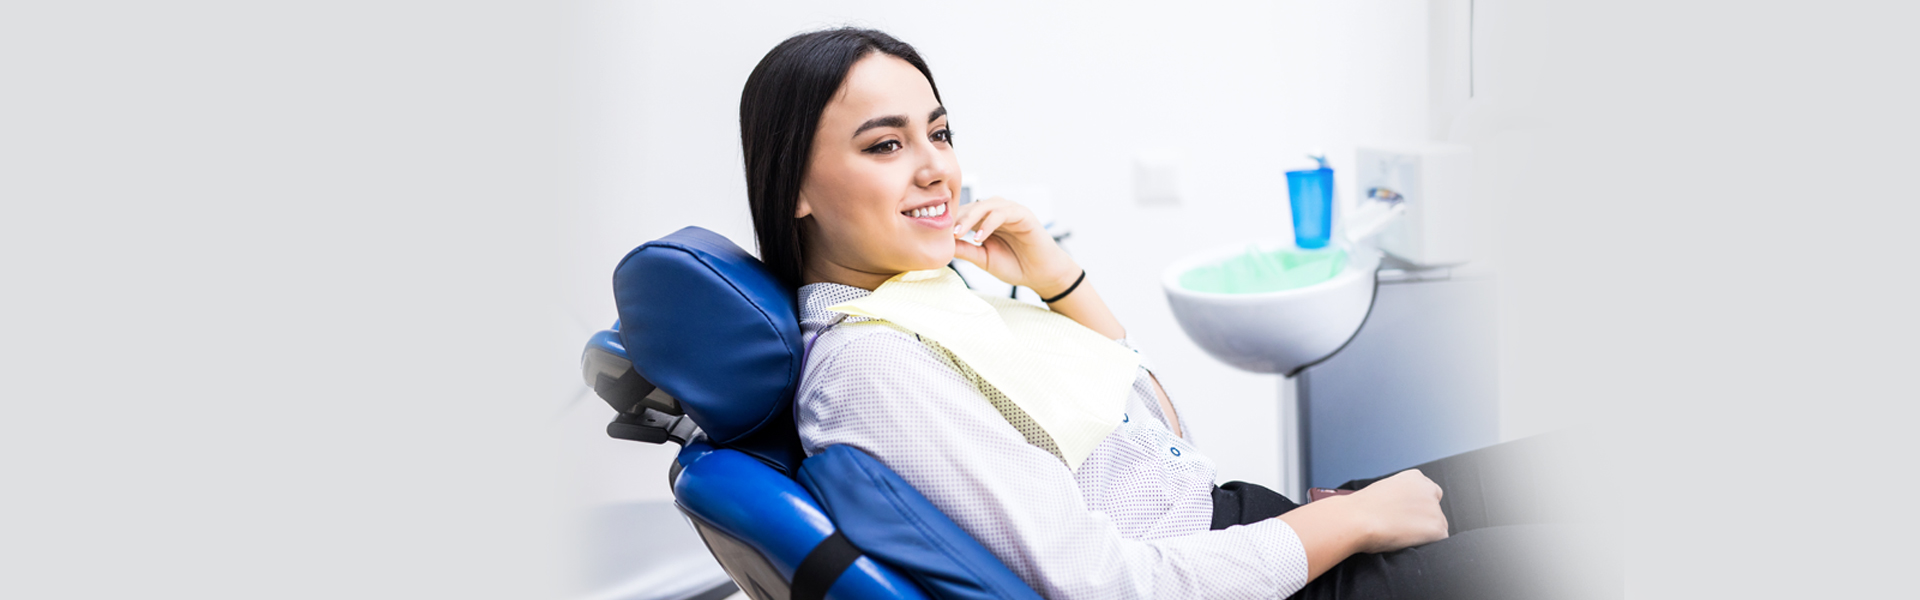 Happy Girl during root canal treatment with Brampton dental clinic